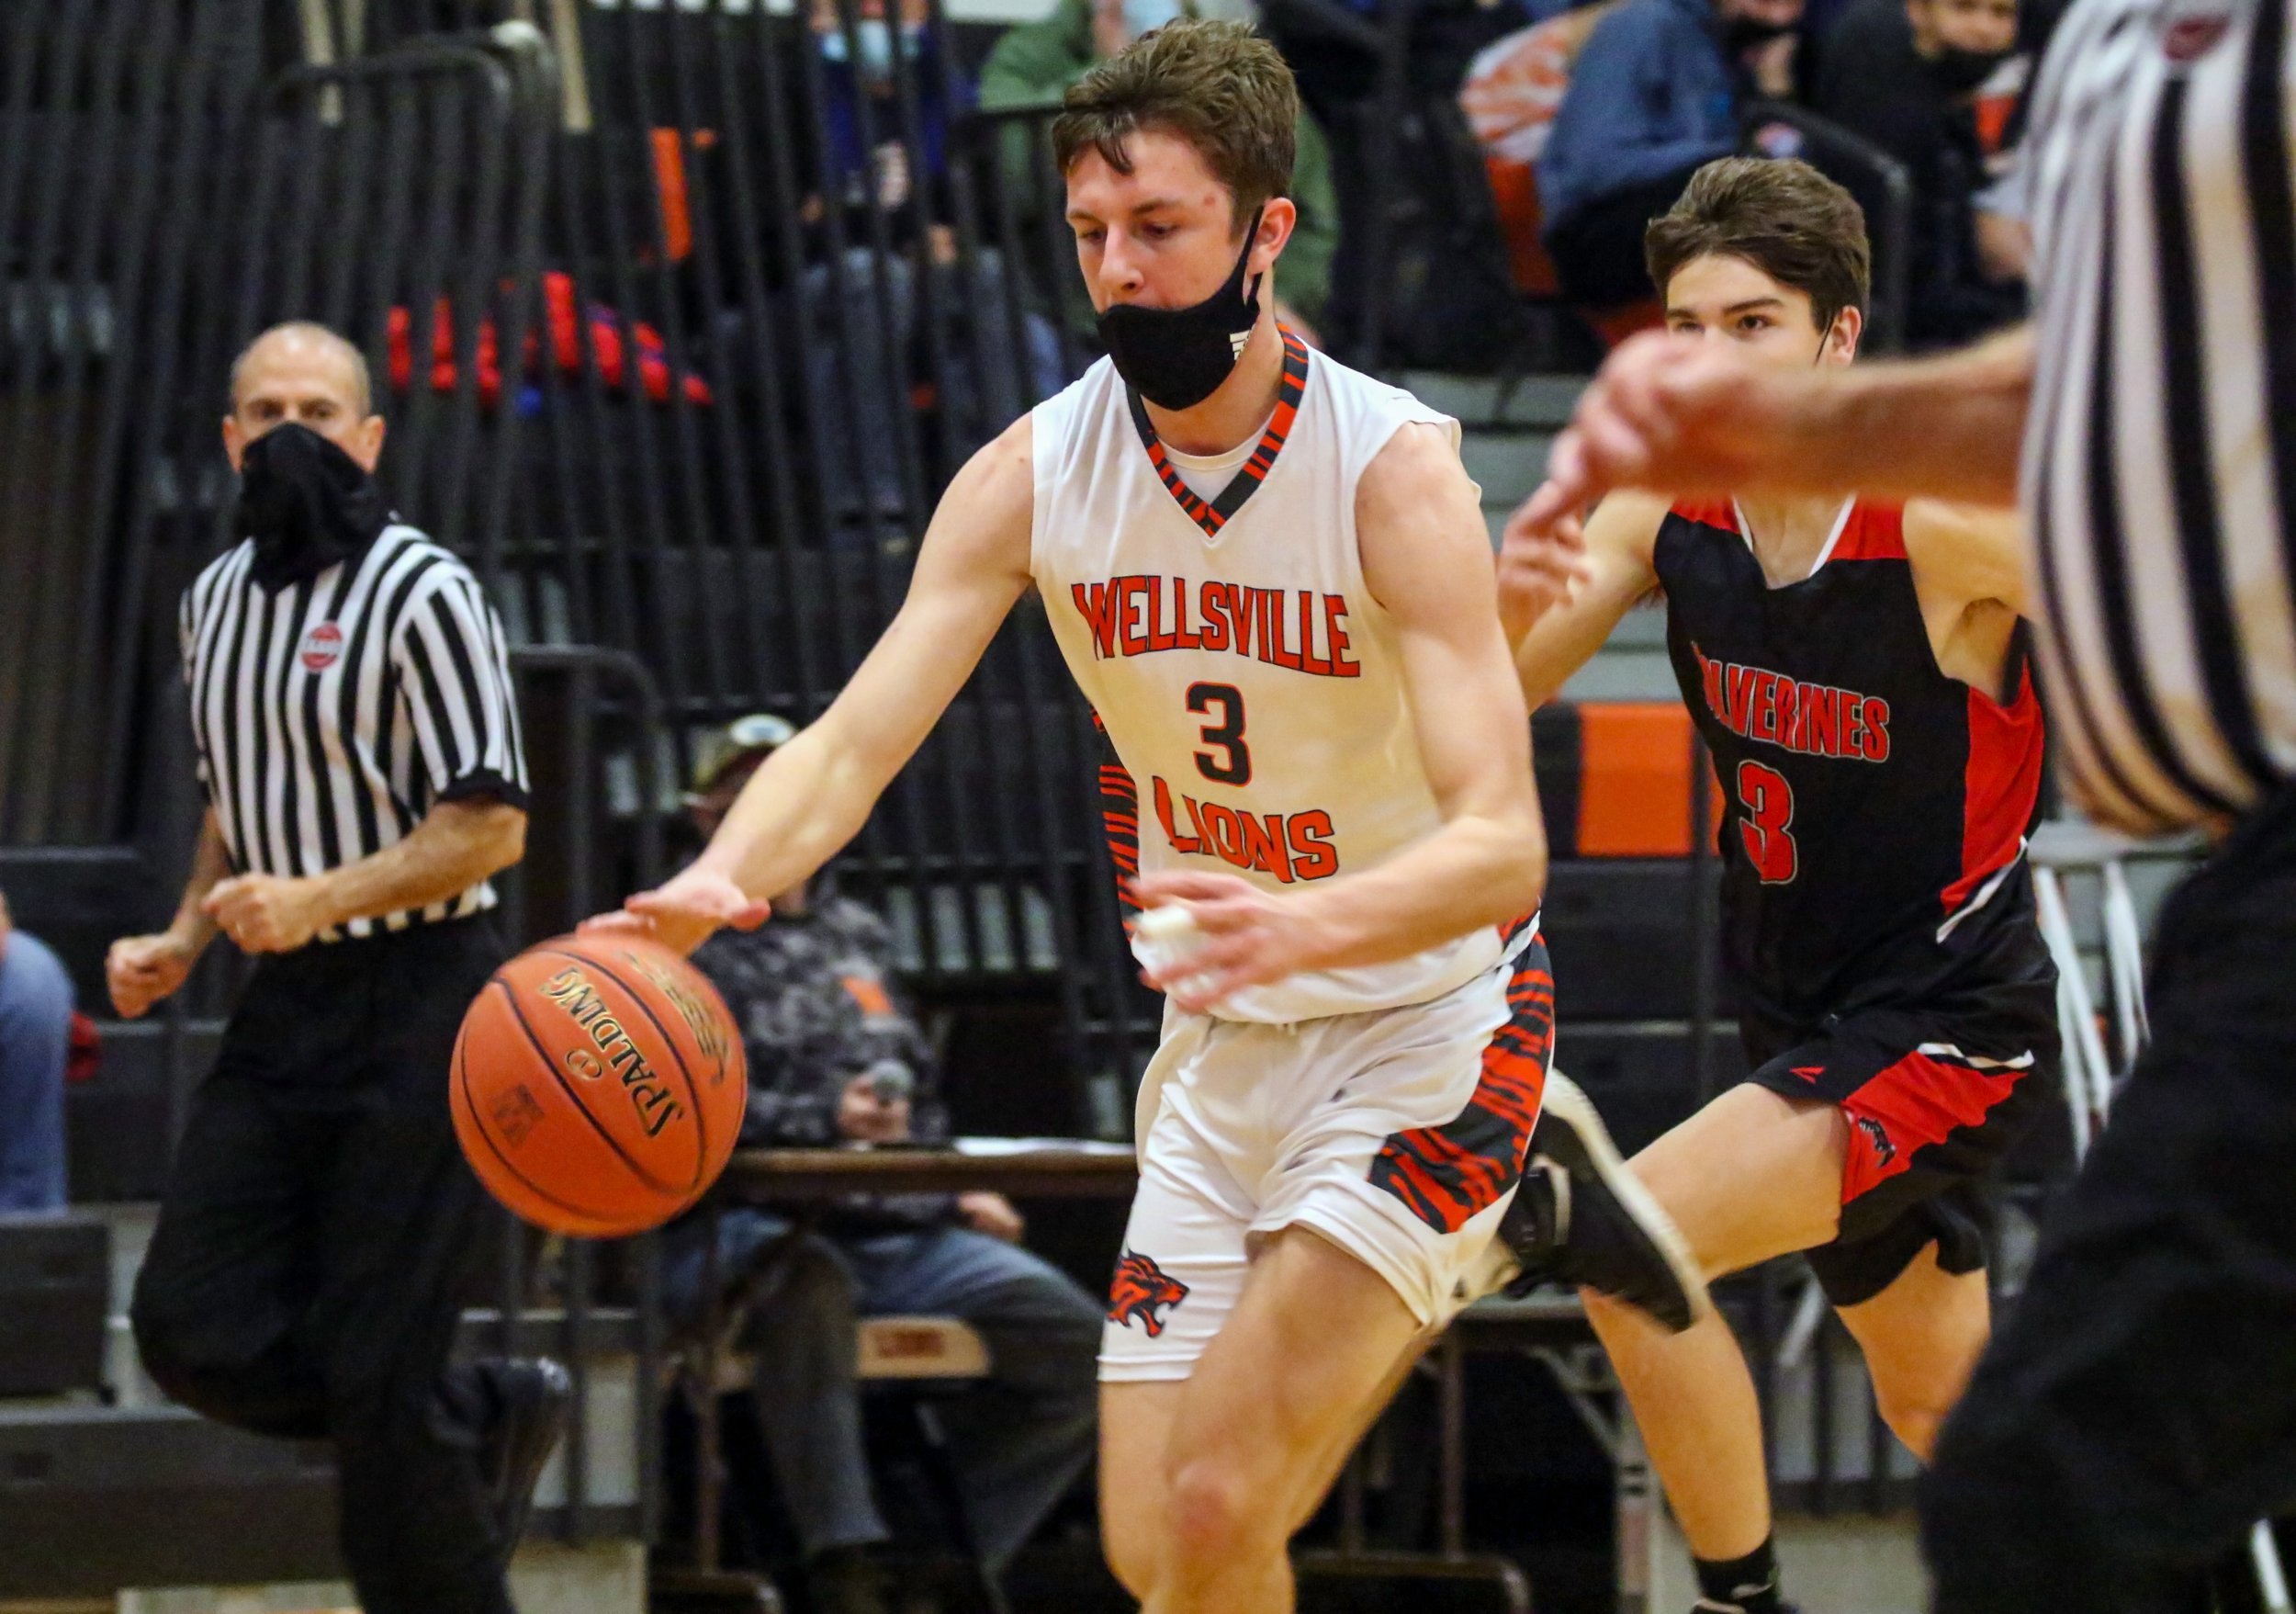  Wellsville senior Alex Perkins (3) pushes the pace down court while Bolivar-Richburg senior Wyatt Karnuth, off-center, gives chase on the way back down during Tuesday night’s home contest in Wellsville. [Chris Brooks/WellsvilleSports.com] 